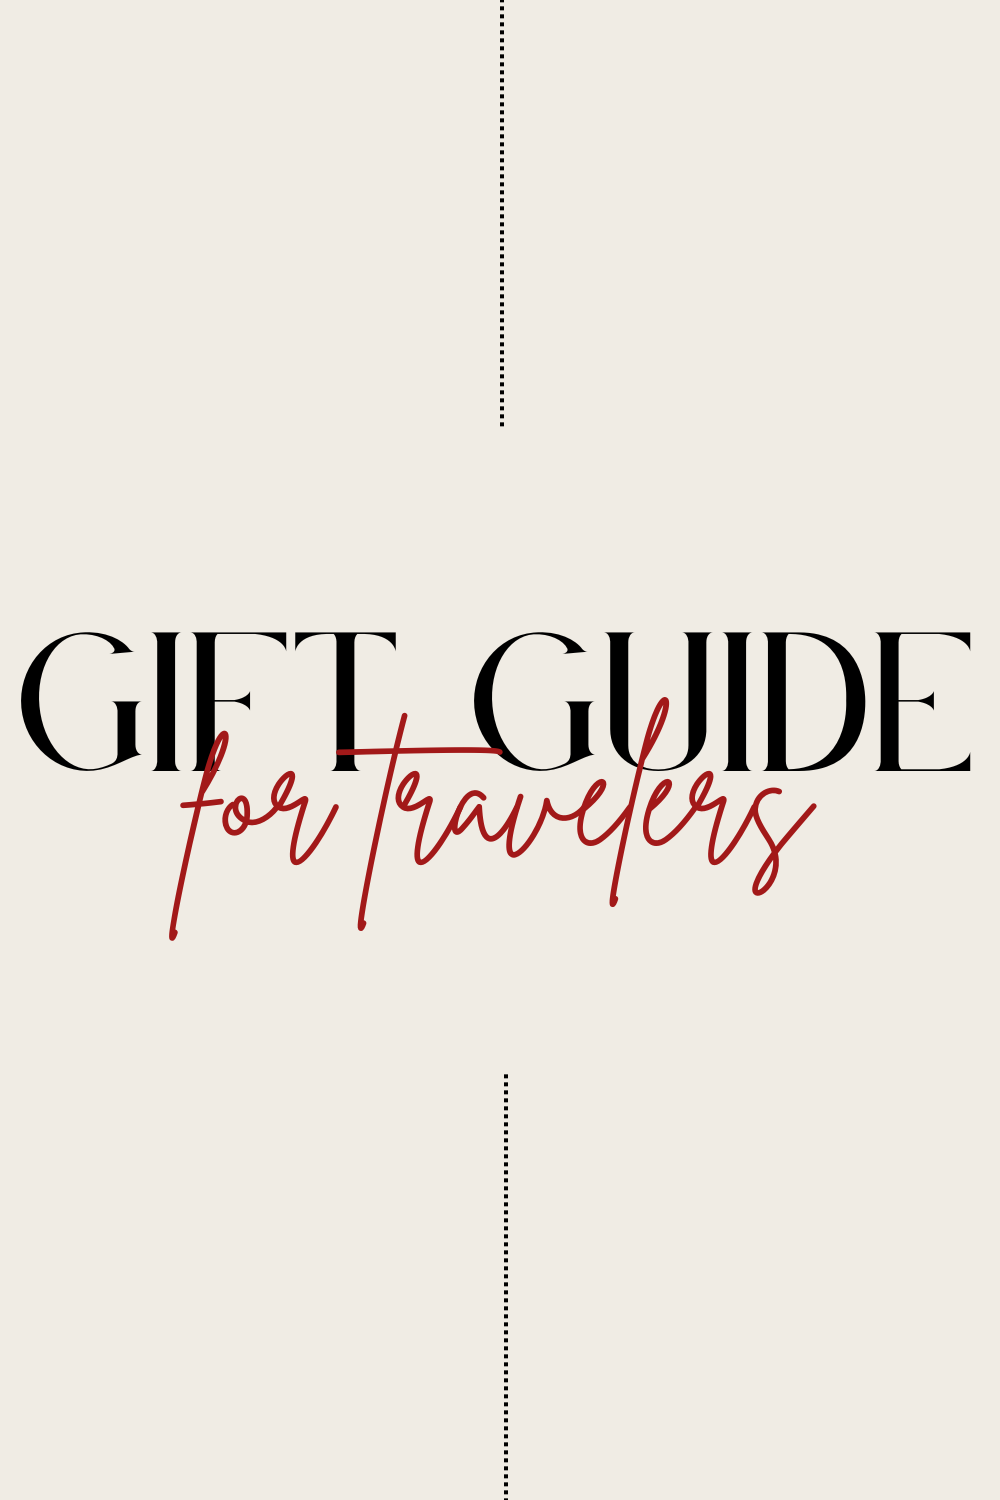 gifts for travel lovers